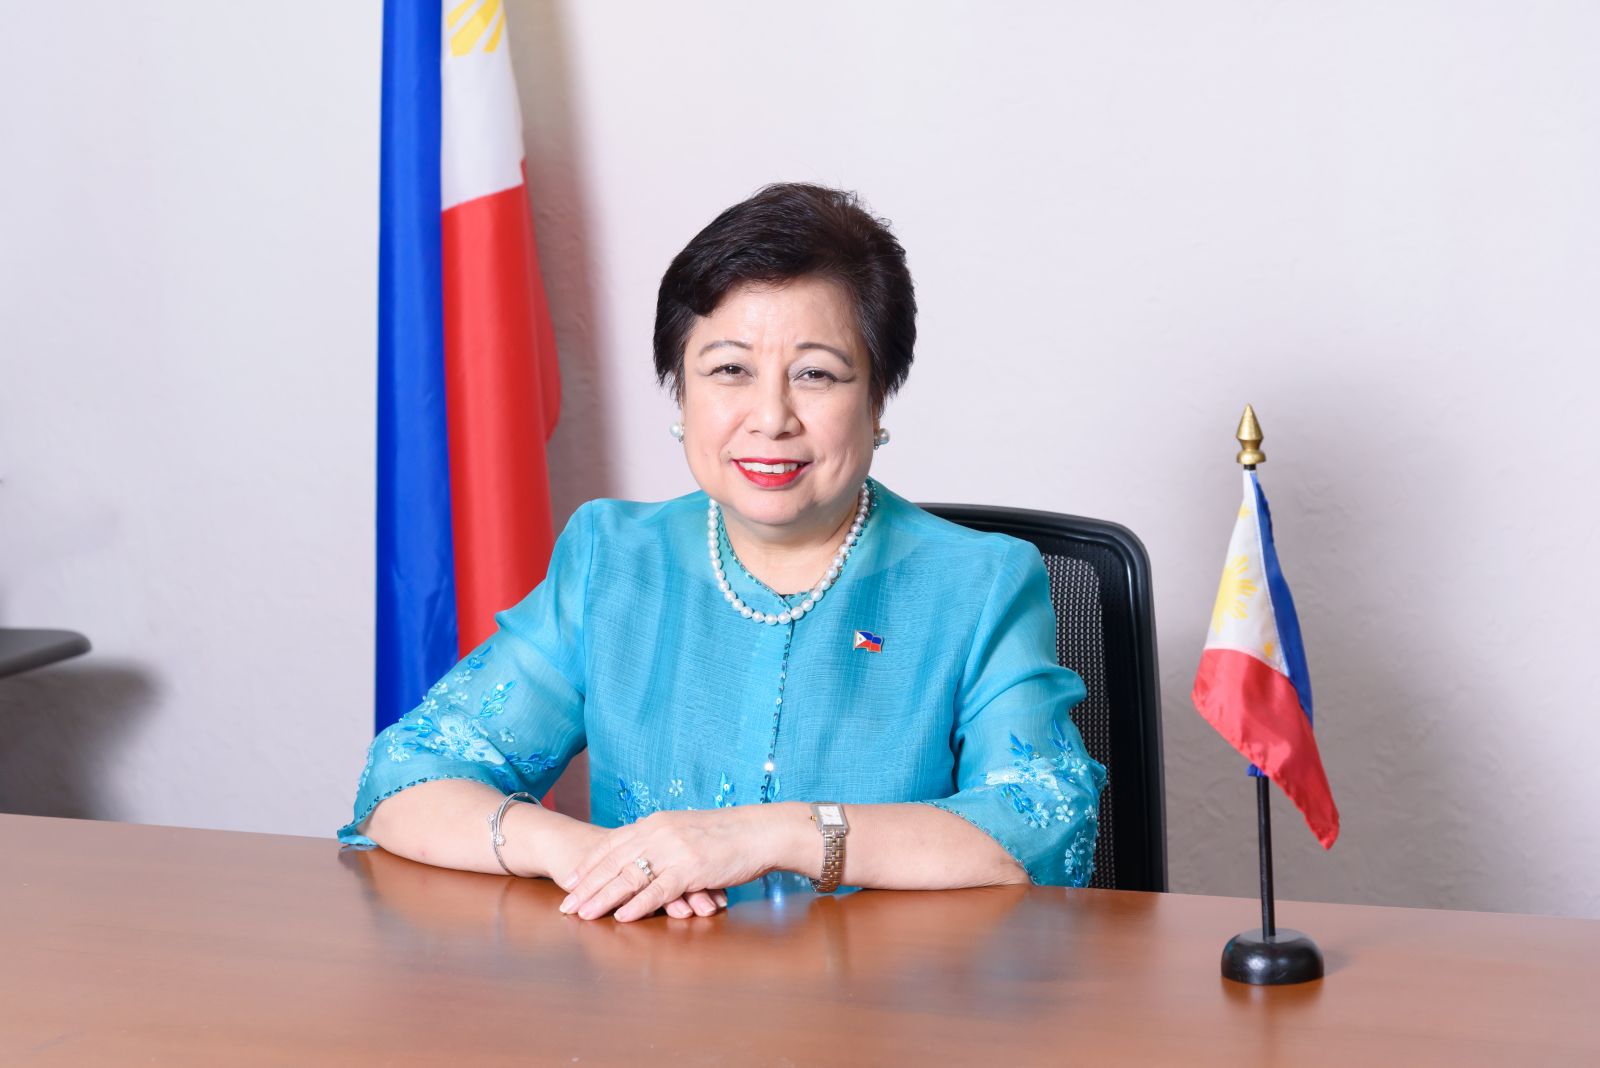 Thriving together Her Excellency Mary Jo A Bernardo-Aragon, the Philippines Ambassador, reflects on a long history of trade and cultural exchanges